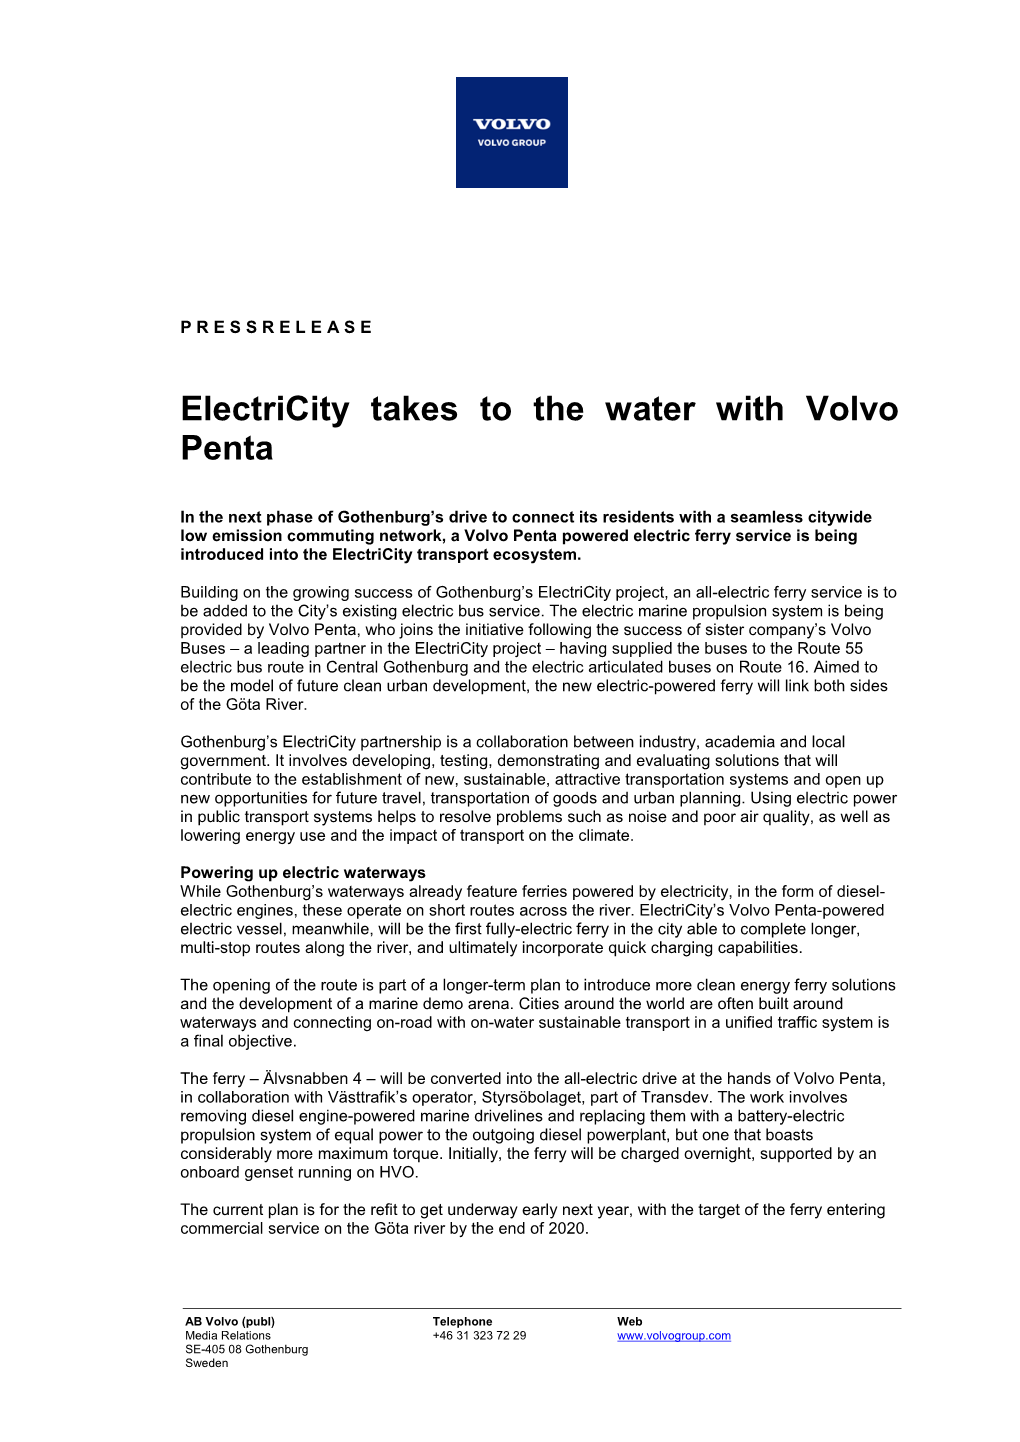 Electricity Takes to the Water with Volvo Penta